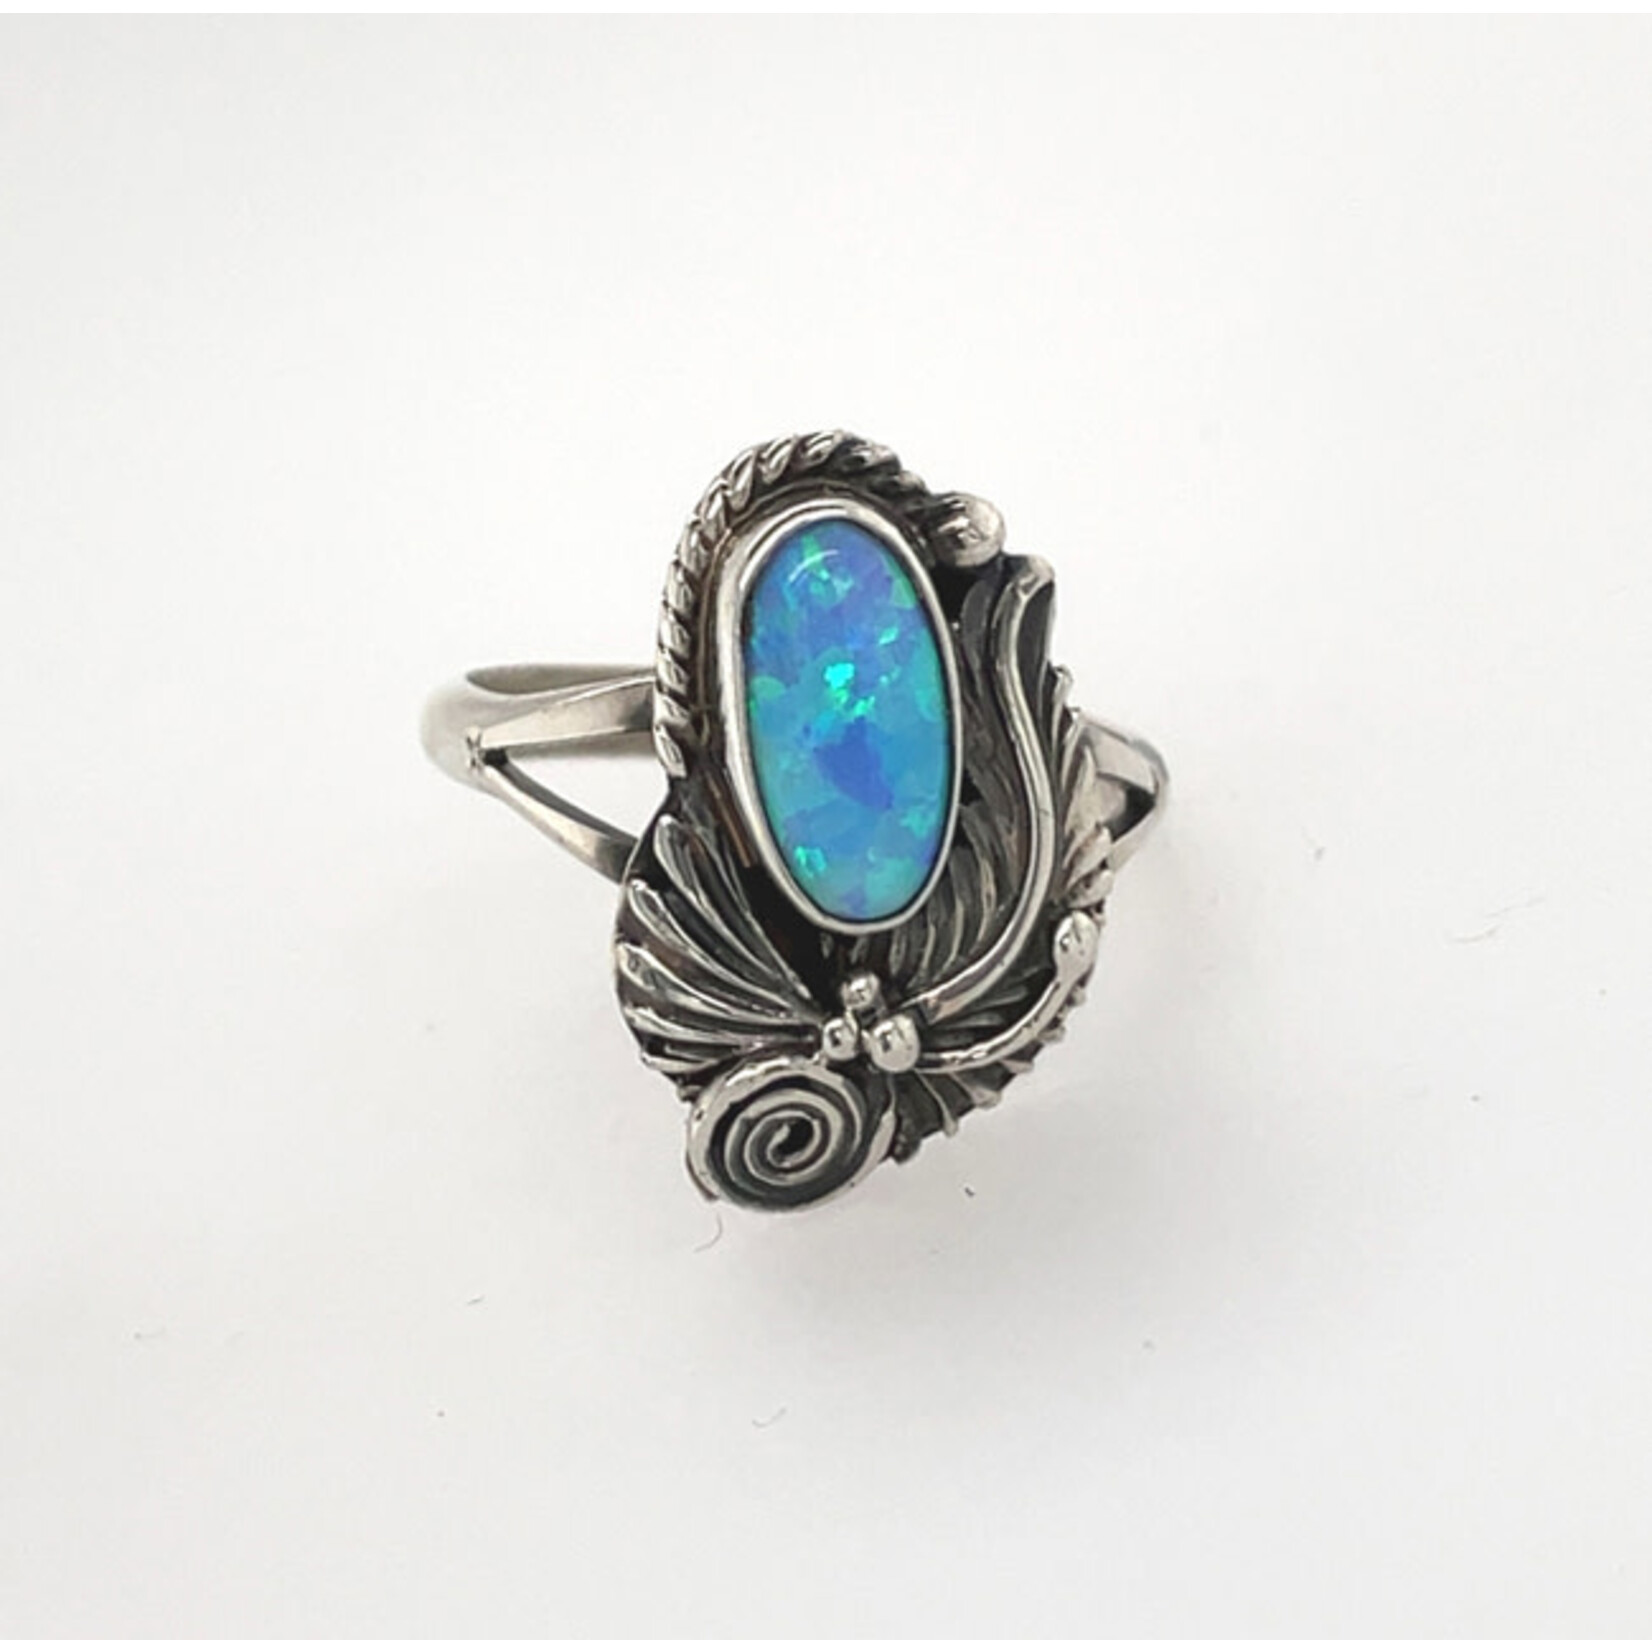 Dendritic Opal Ring in Sterling Silver, 8.75 US – Kathy Bankston